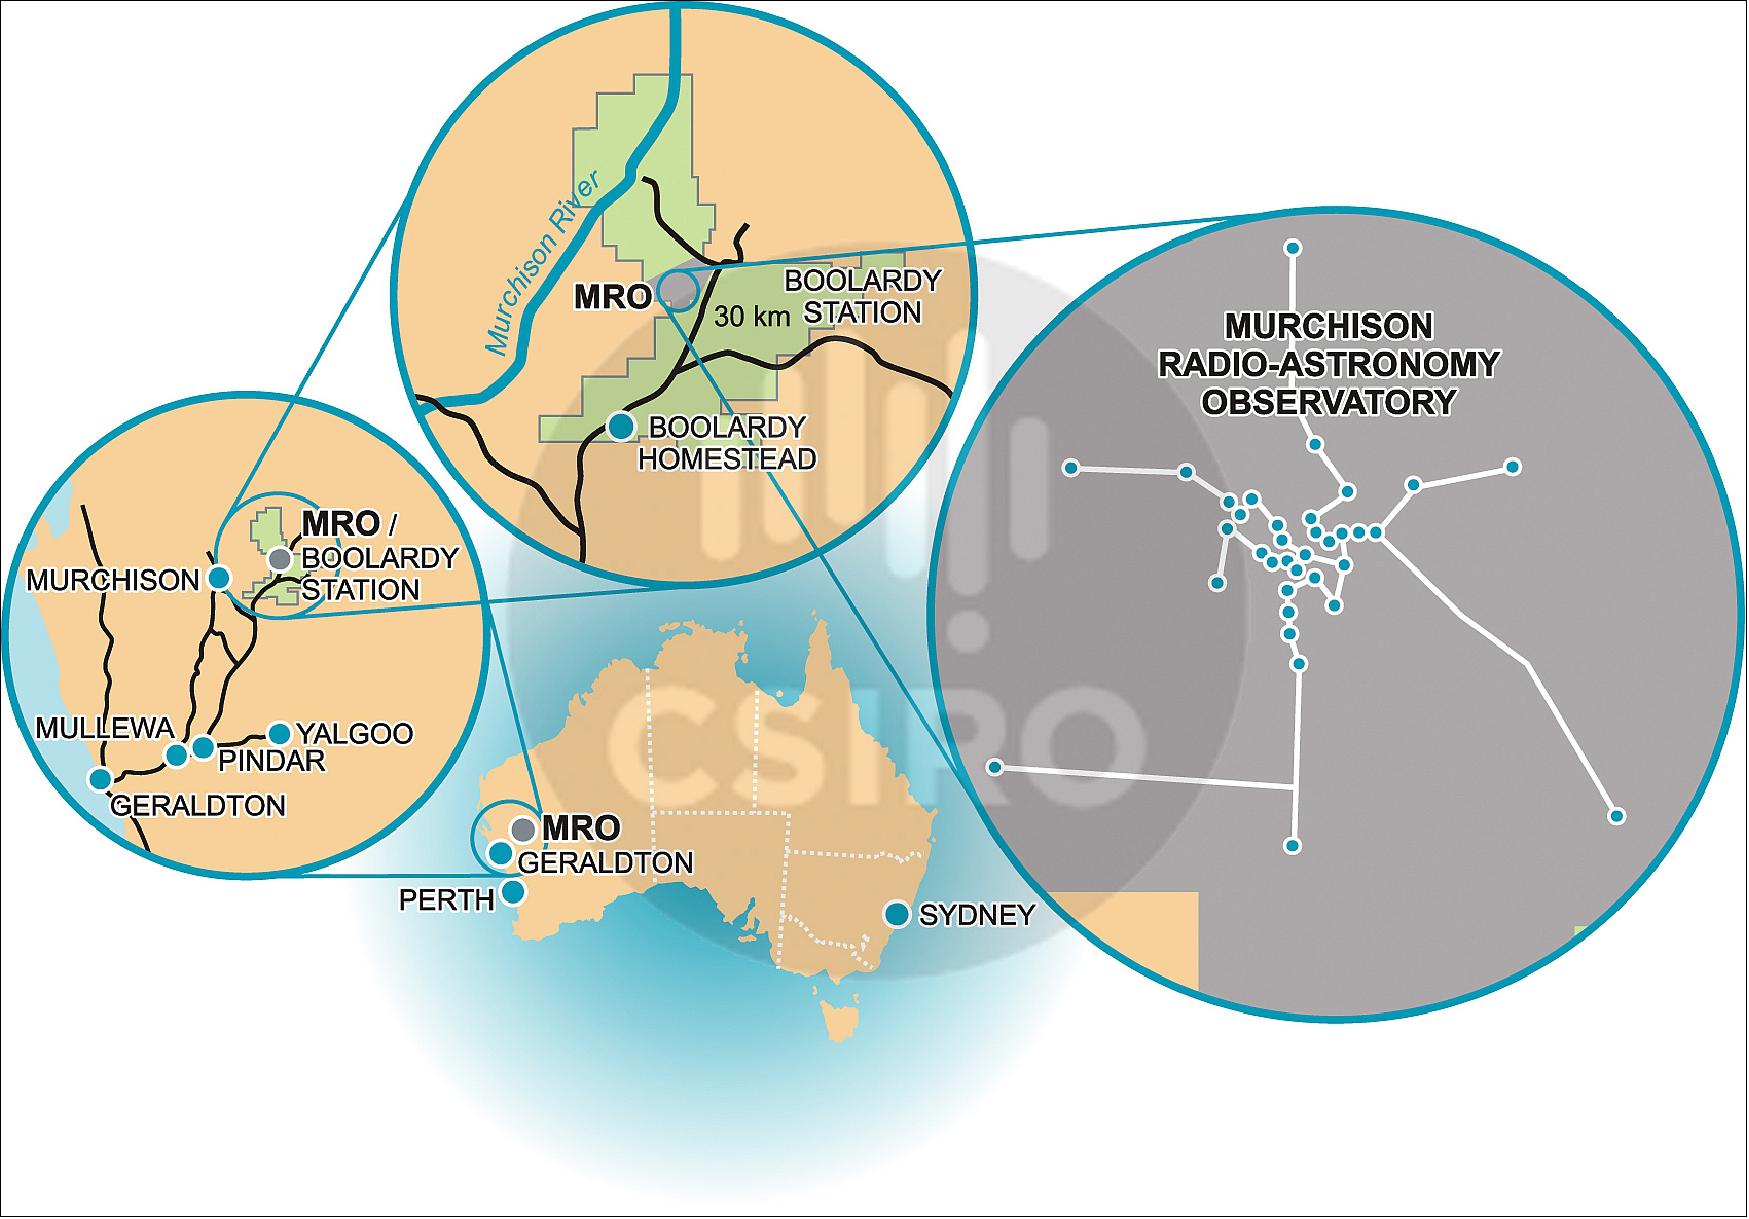 Figure 30: The core of the Australian SKA activity is located at CSIRO's Murchison Radio-astronomy Observatory (MRO), and surrounding Mid West Radio-Quiet Zone in Western Australia. The MRO is already home to the ASKAP telescope, as well as another of the SKA precursors, the Murchison Widefield Array (MWA), image credit: ATNF